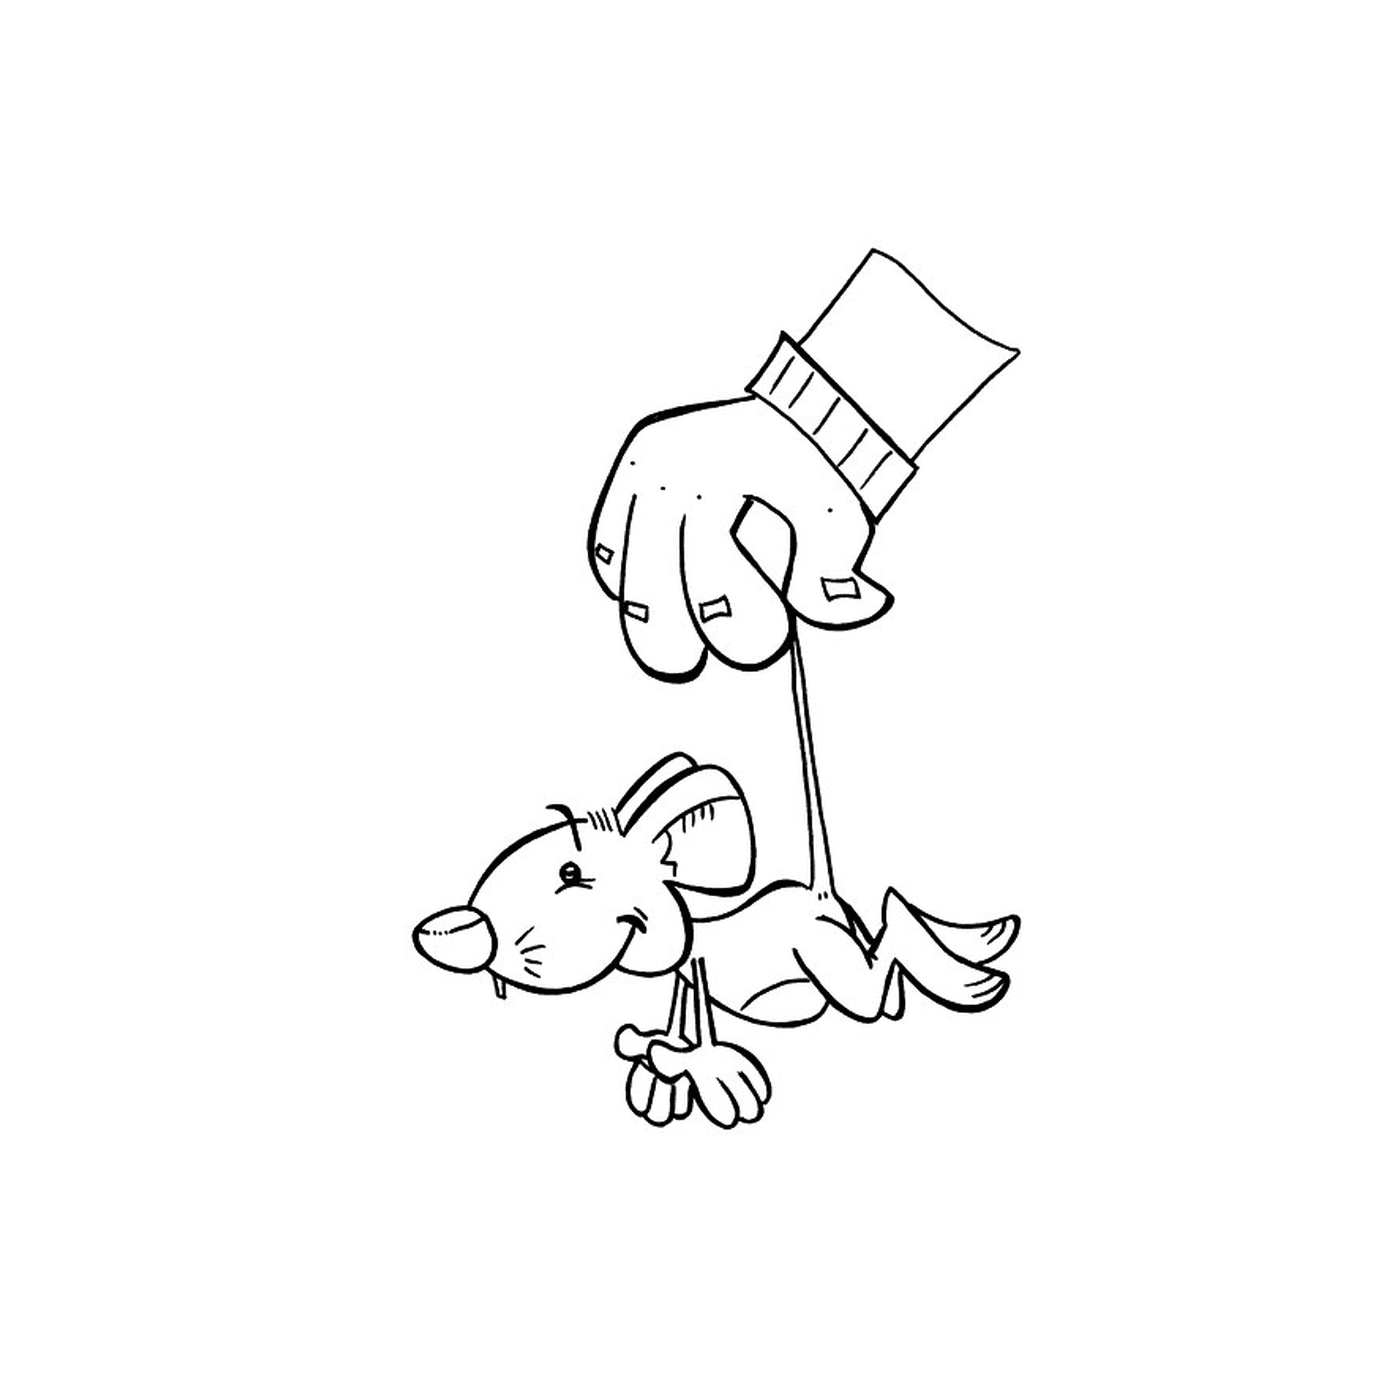  A hand holding a stick with a dog 